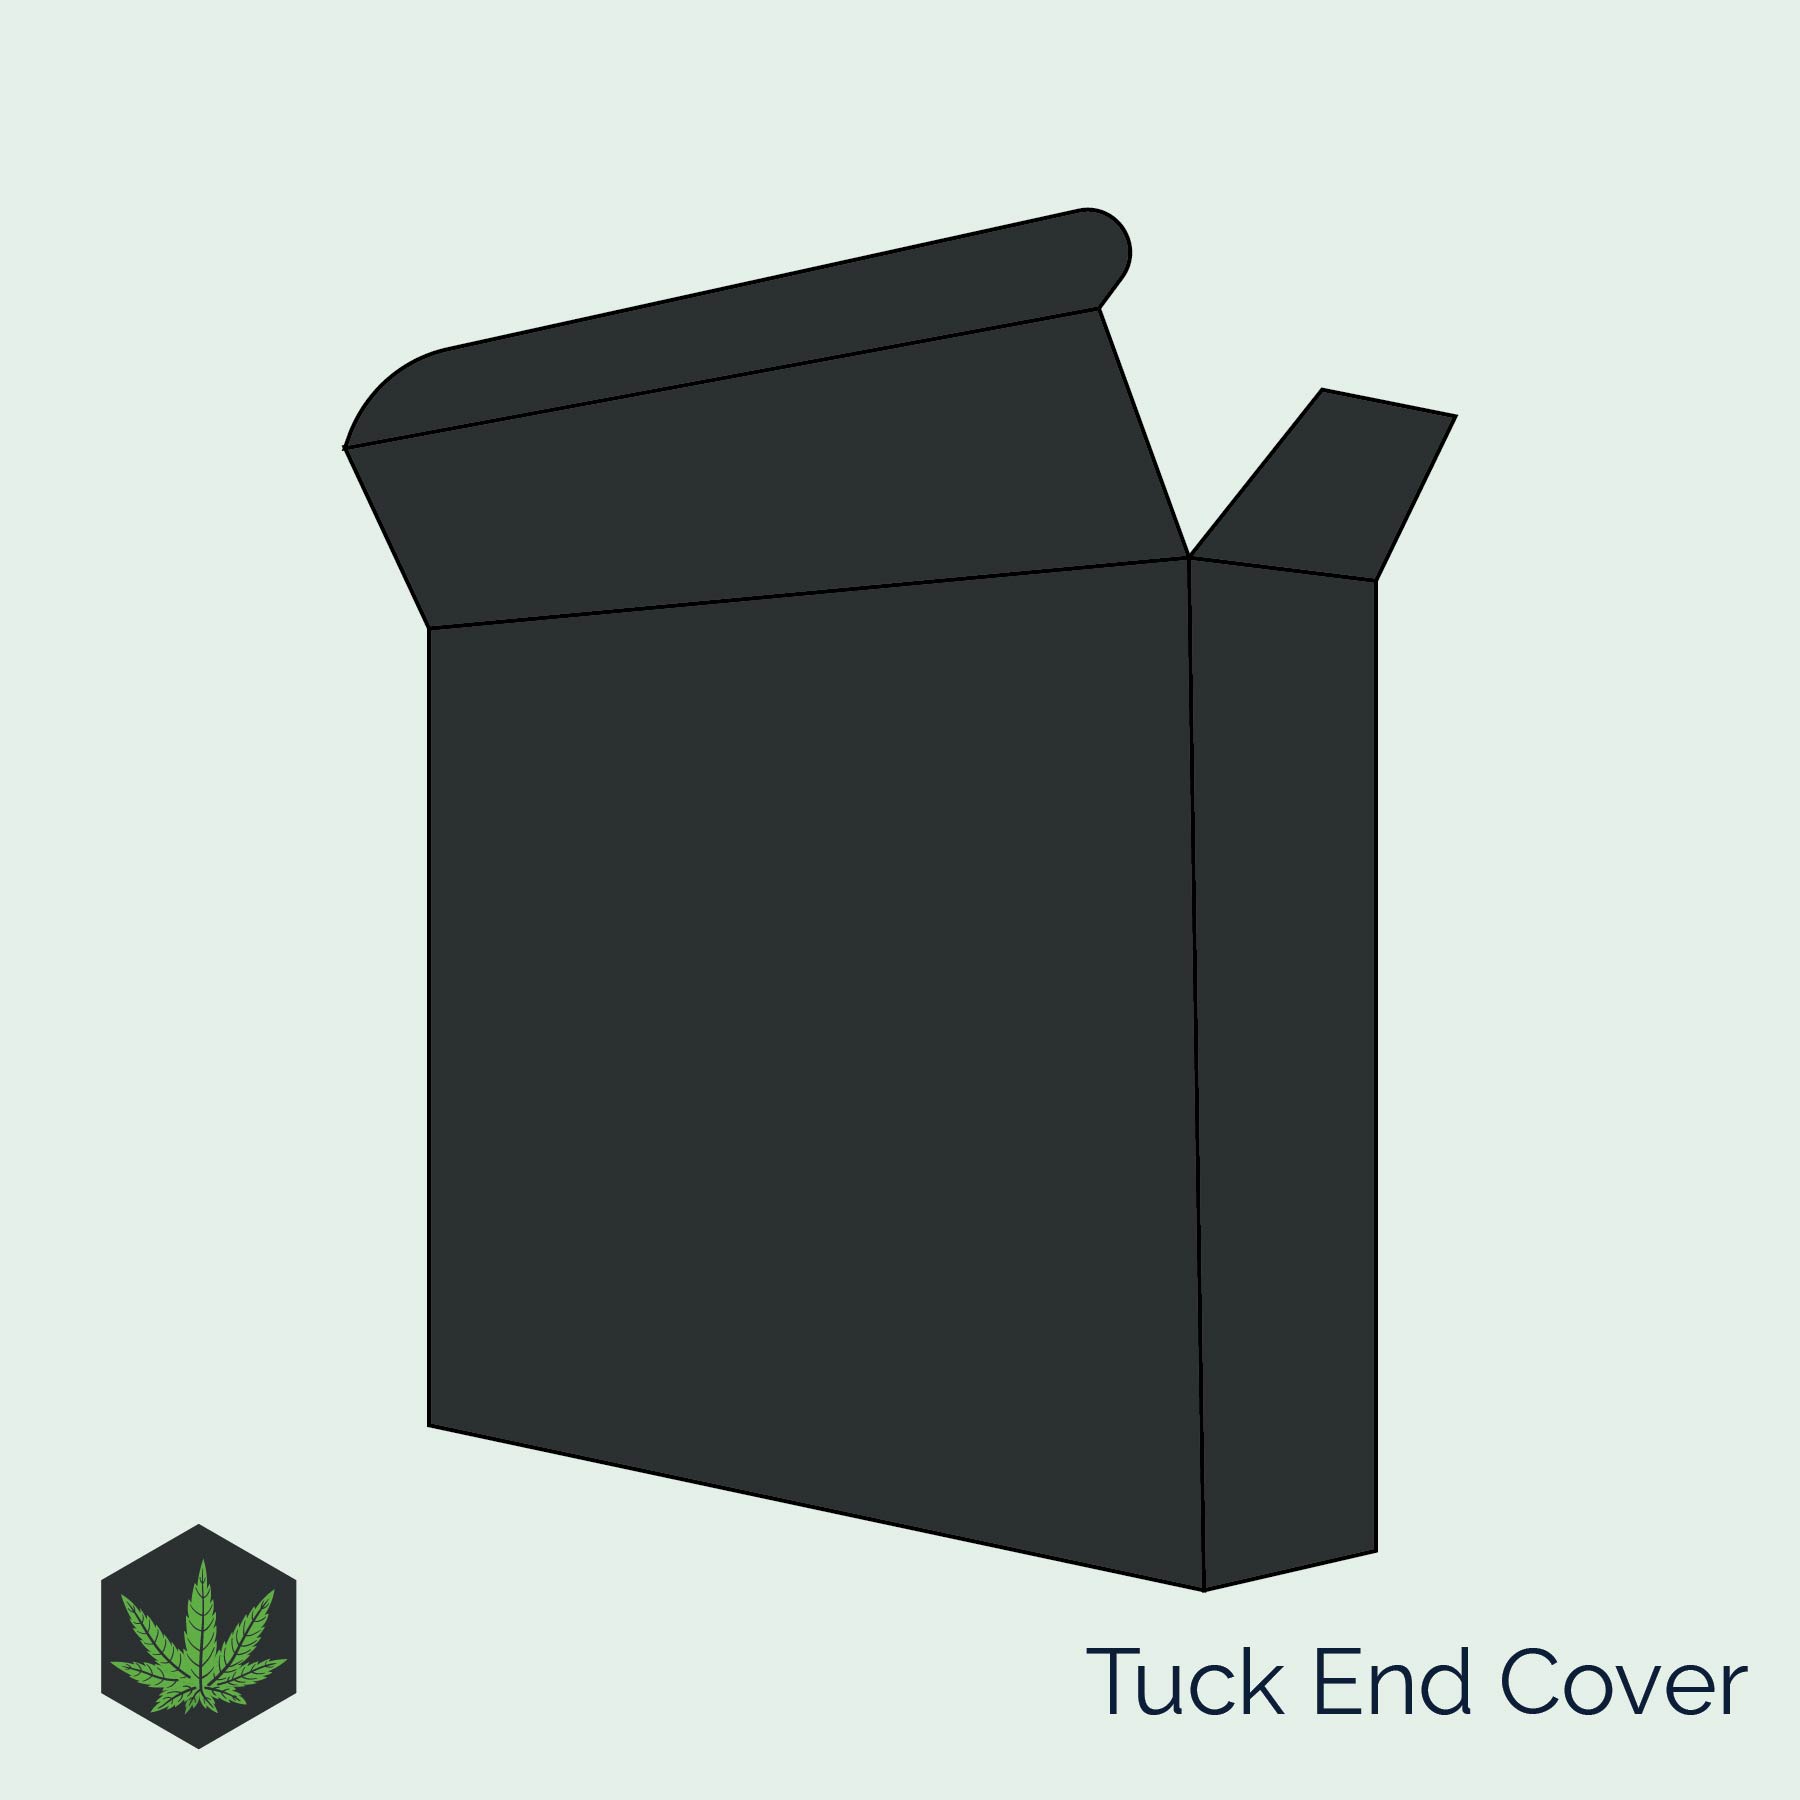 Tuck End Cover Containers